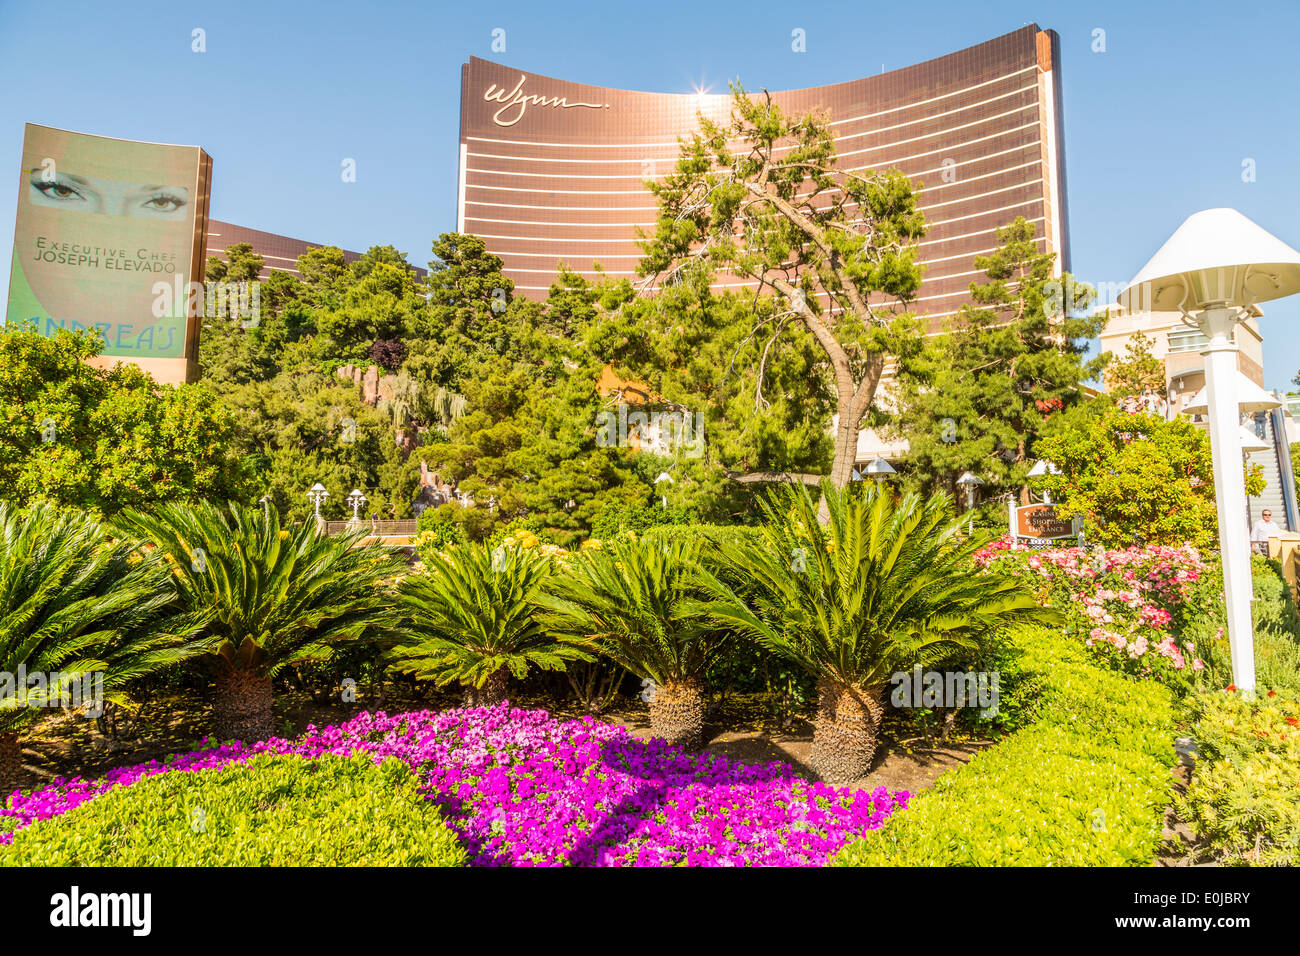 Louis Vuitton Store at the Wynn Esplanade at the Wynn Hotel and Casino  Editorial Stock Photo - Image of sign, america: 41782928